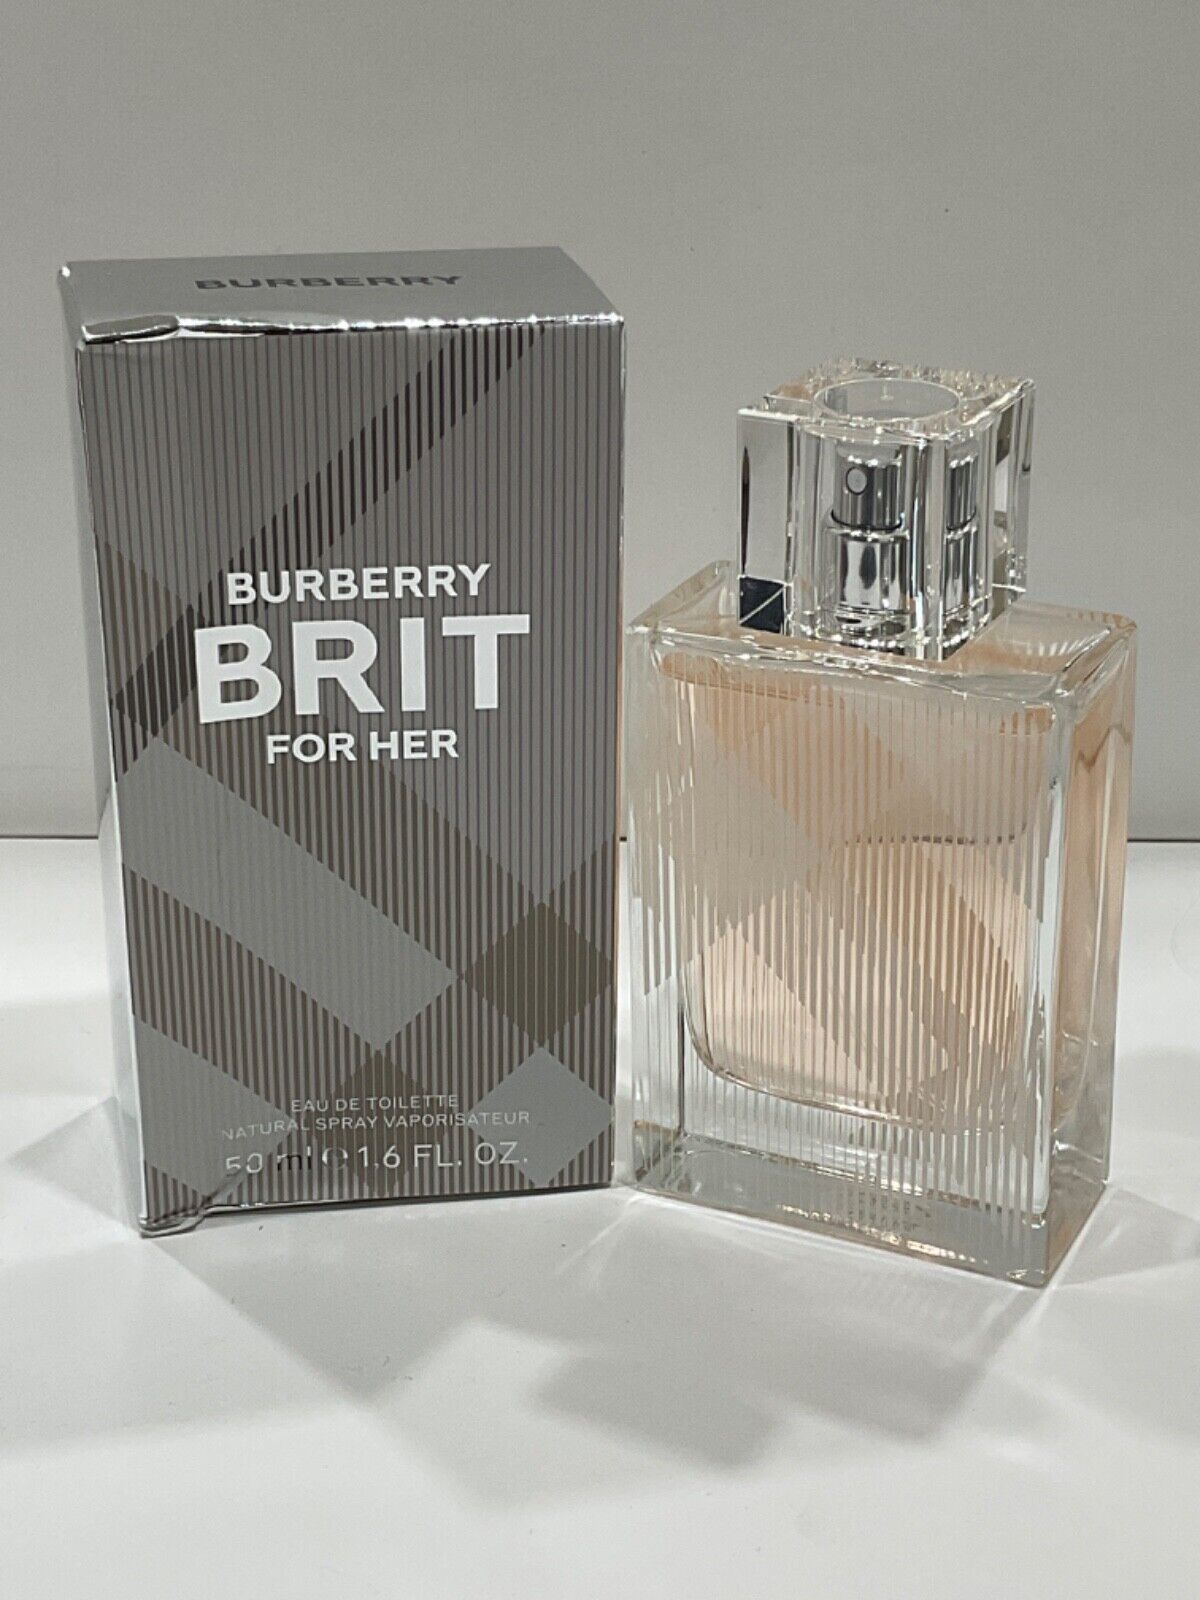 Primary image for BURBERRY BRIT FOR HER WOMEN EDT SPRAY 1.6 OZ / 50 ML NEW But box is damaged